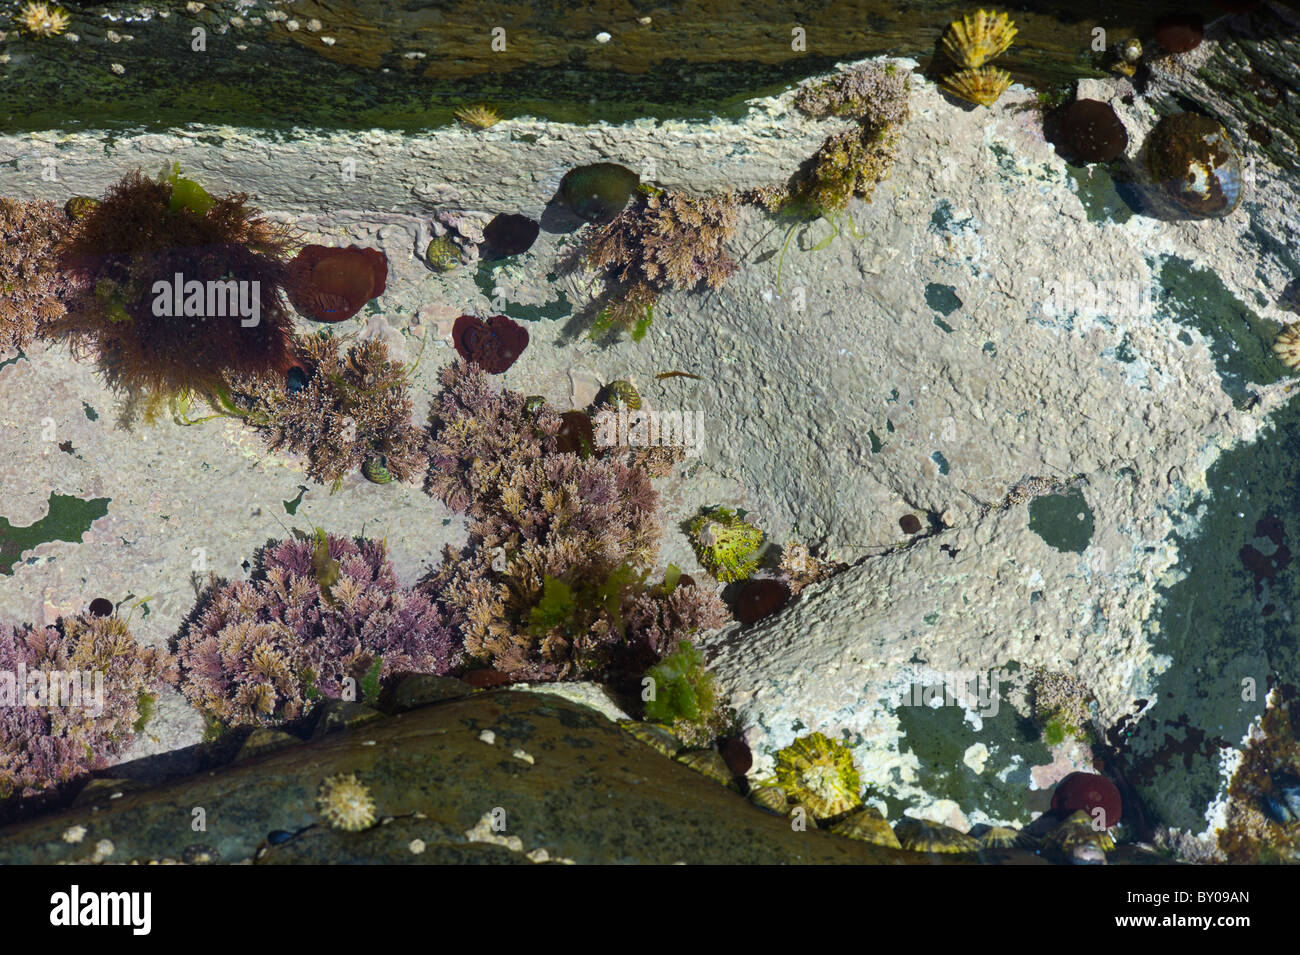 Rock pool, white lichens, seaweed, limpets and sea anemones, Kilkee, County Clare, West Coast of Ireland Stock Photo